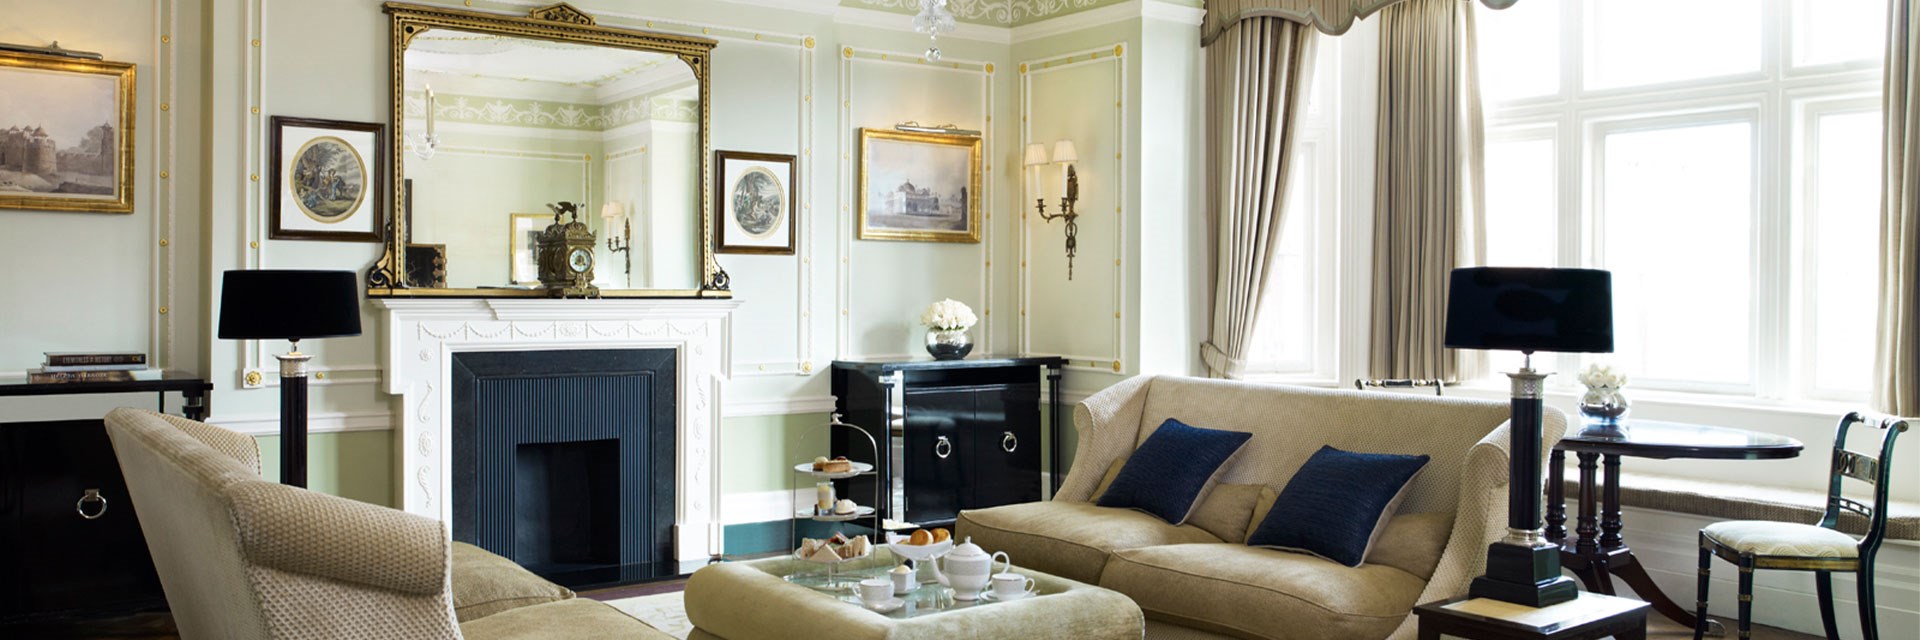 afternoon tea on coffee table, two sofas, fireplace and mirror